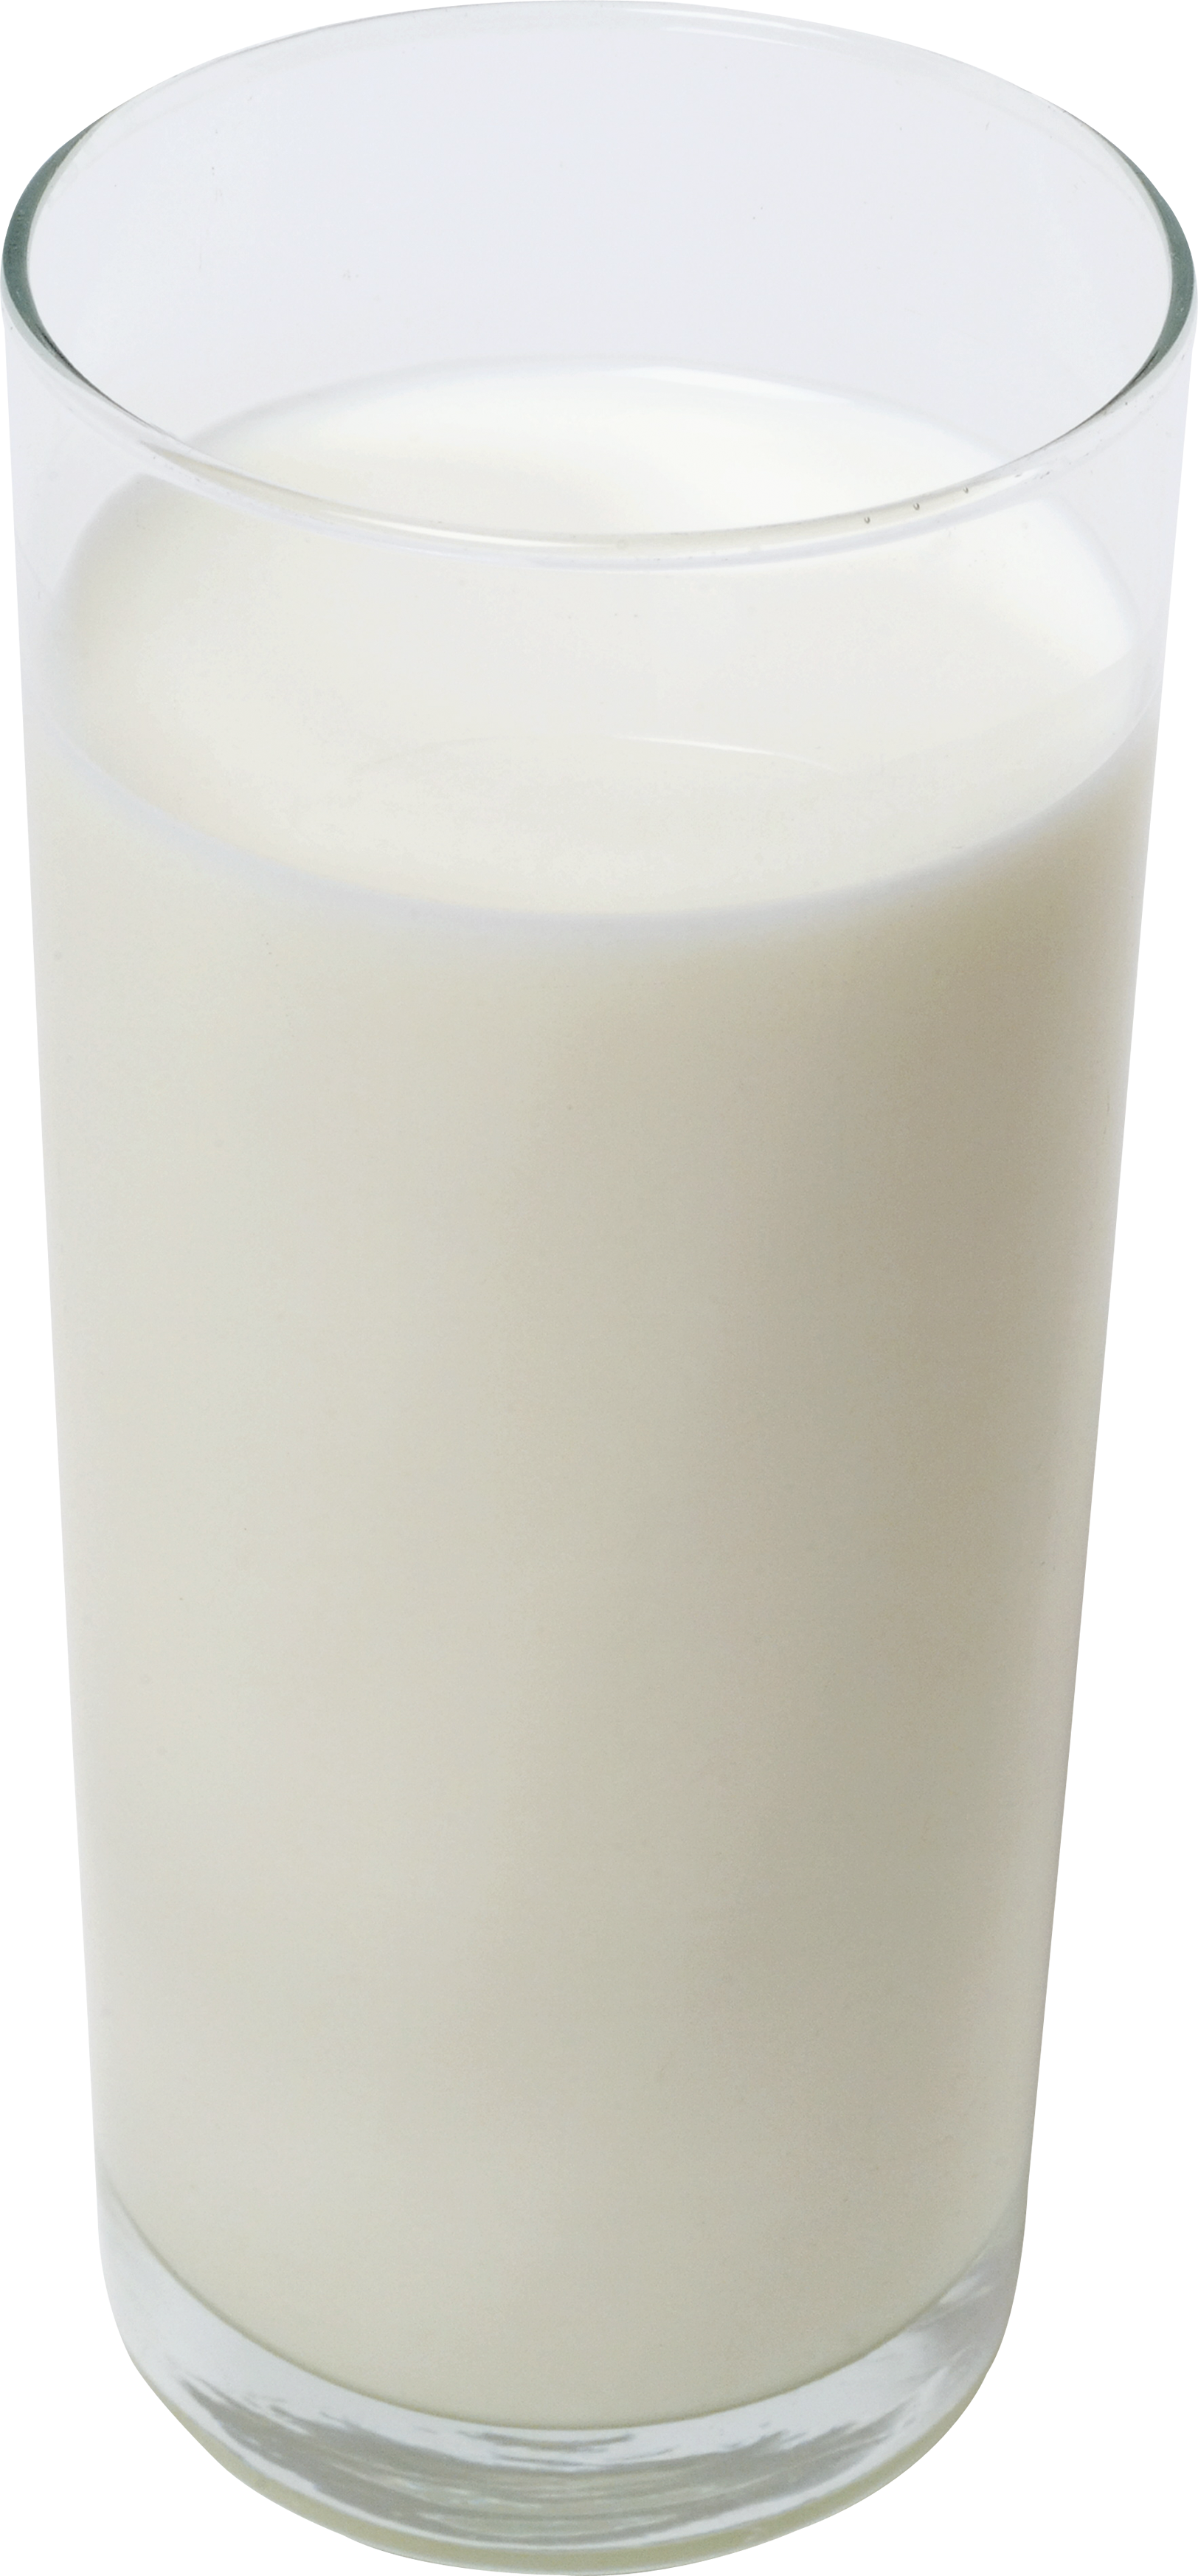 dairy clipart transparent background